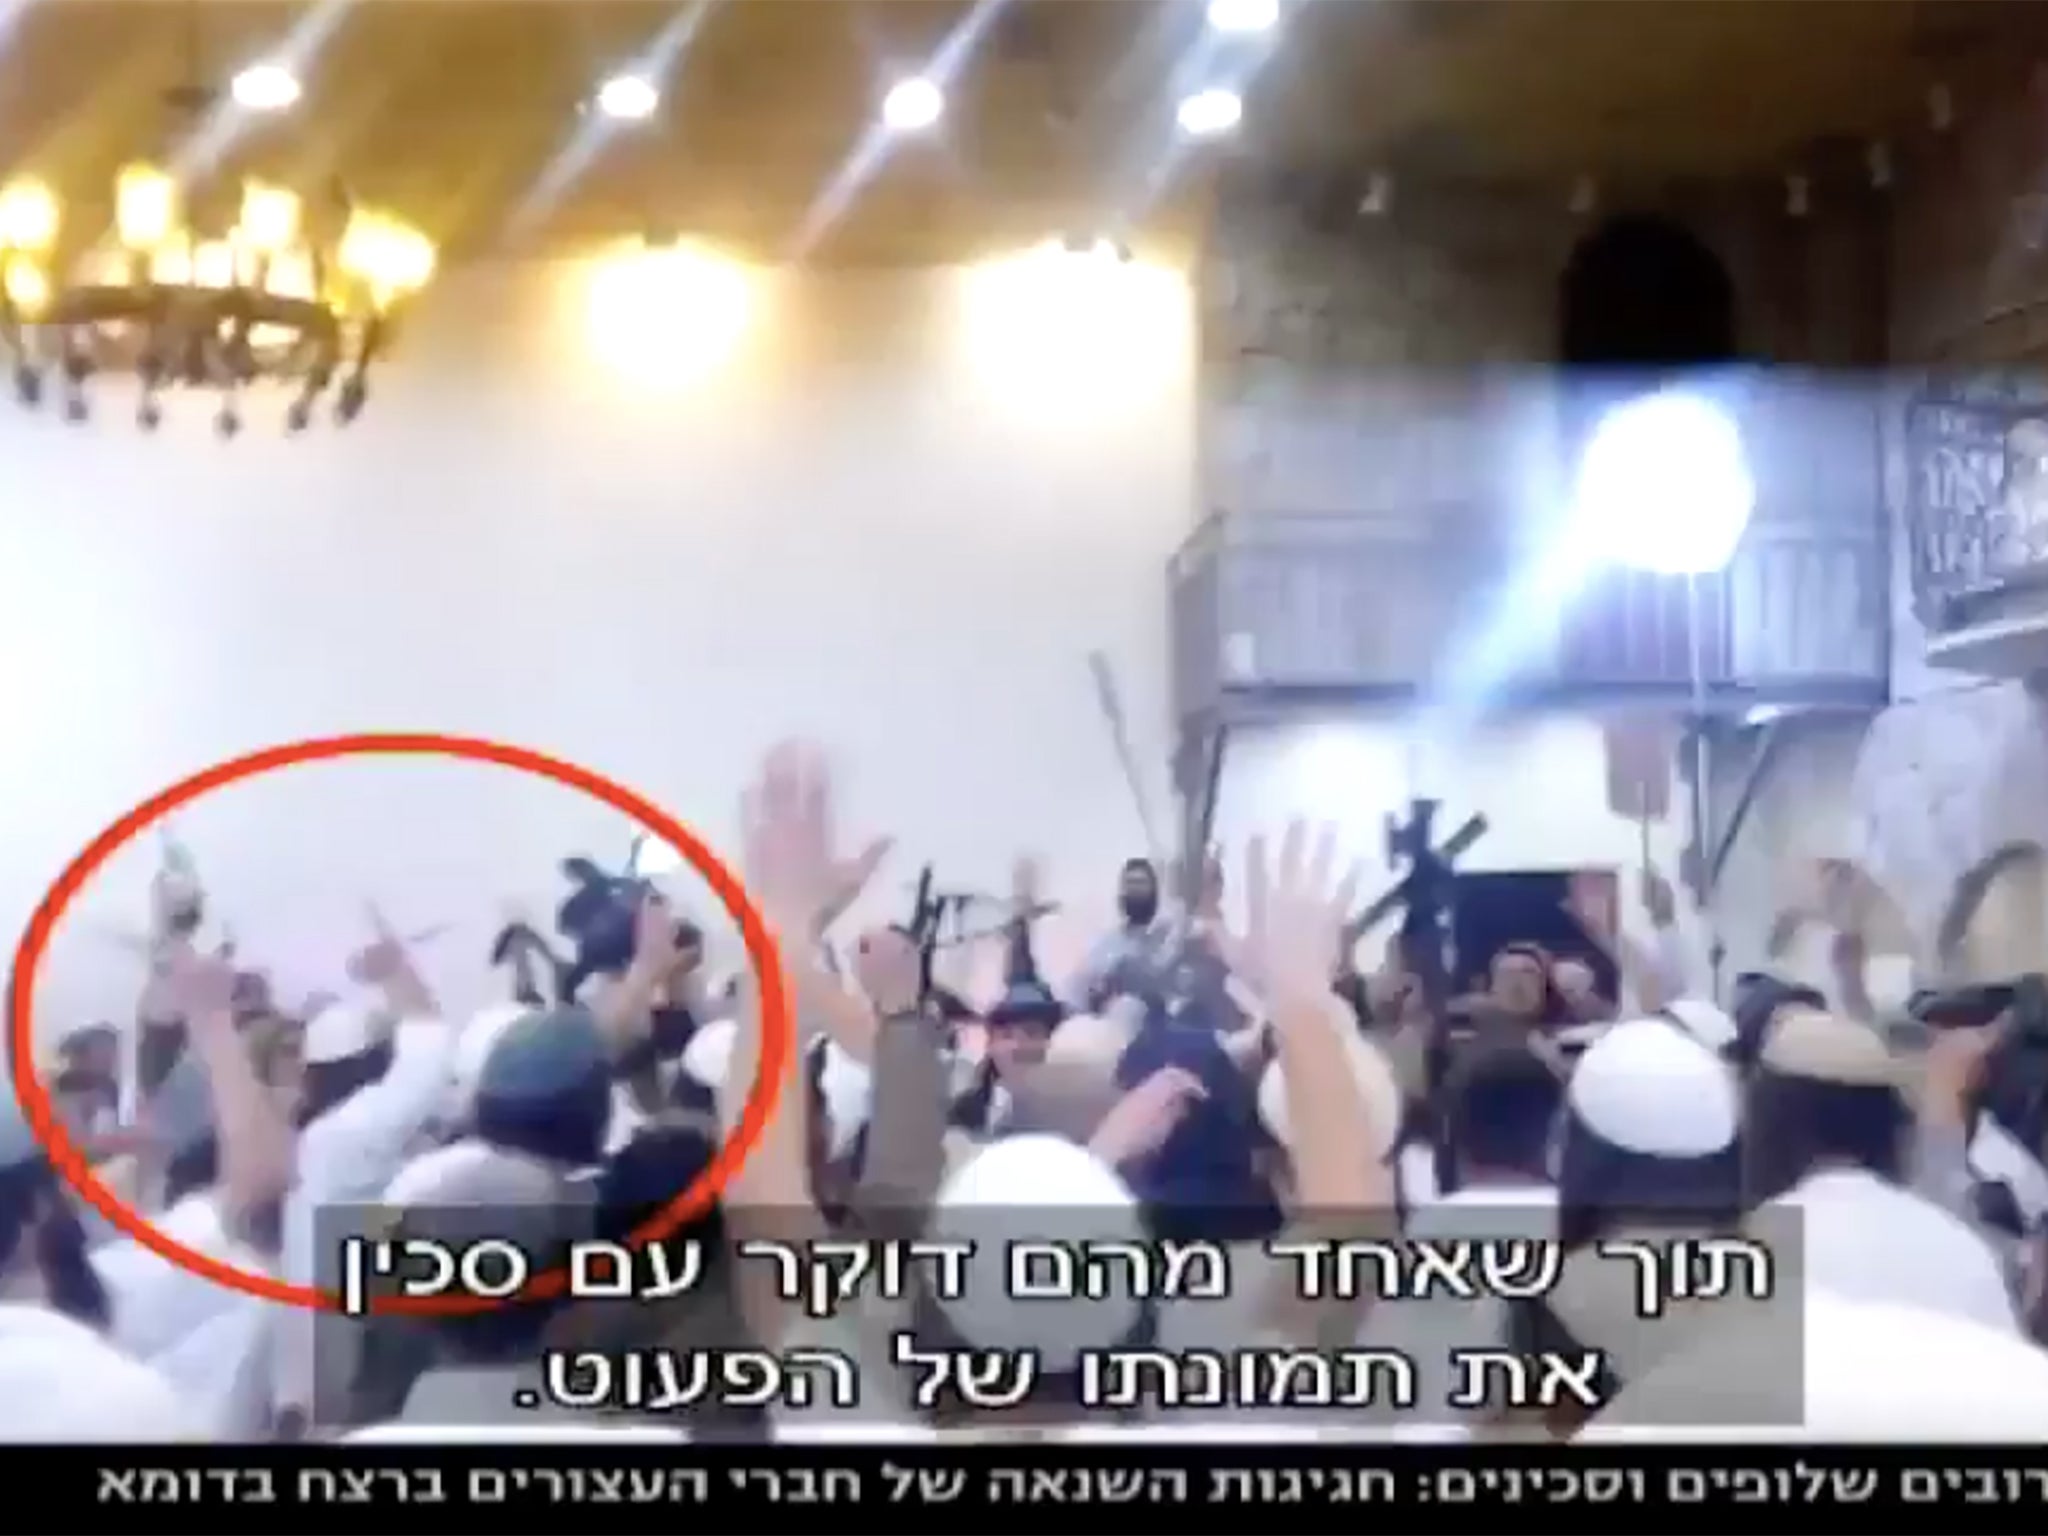 The video was shown on Israeli TV channel News 10 and showed wedding guests dancing with guns and knives